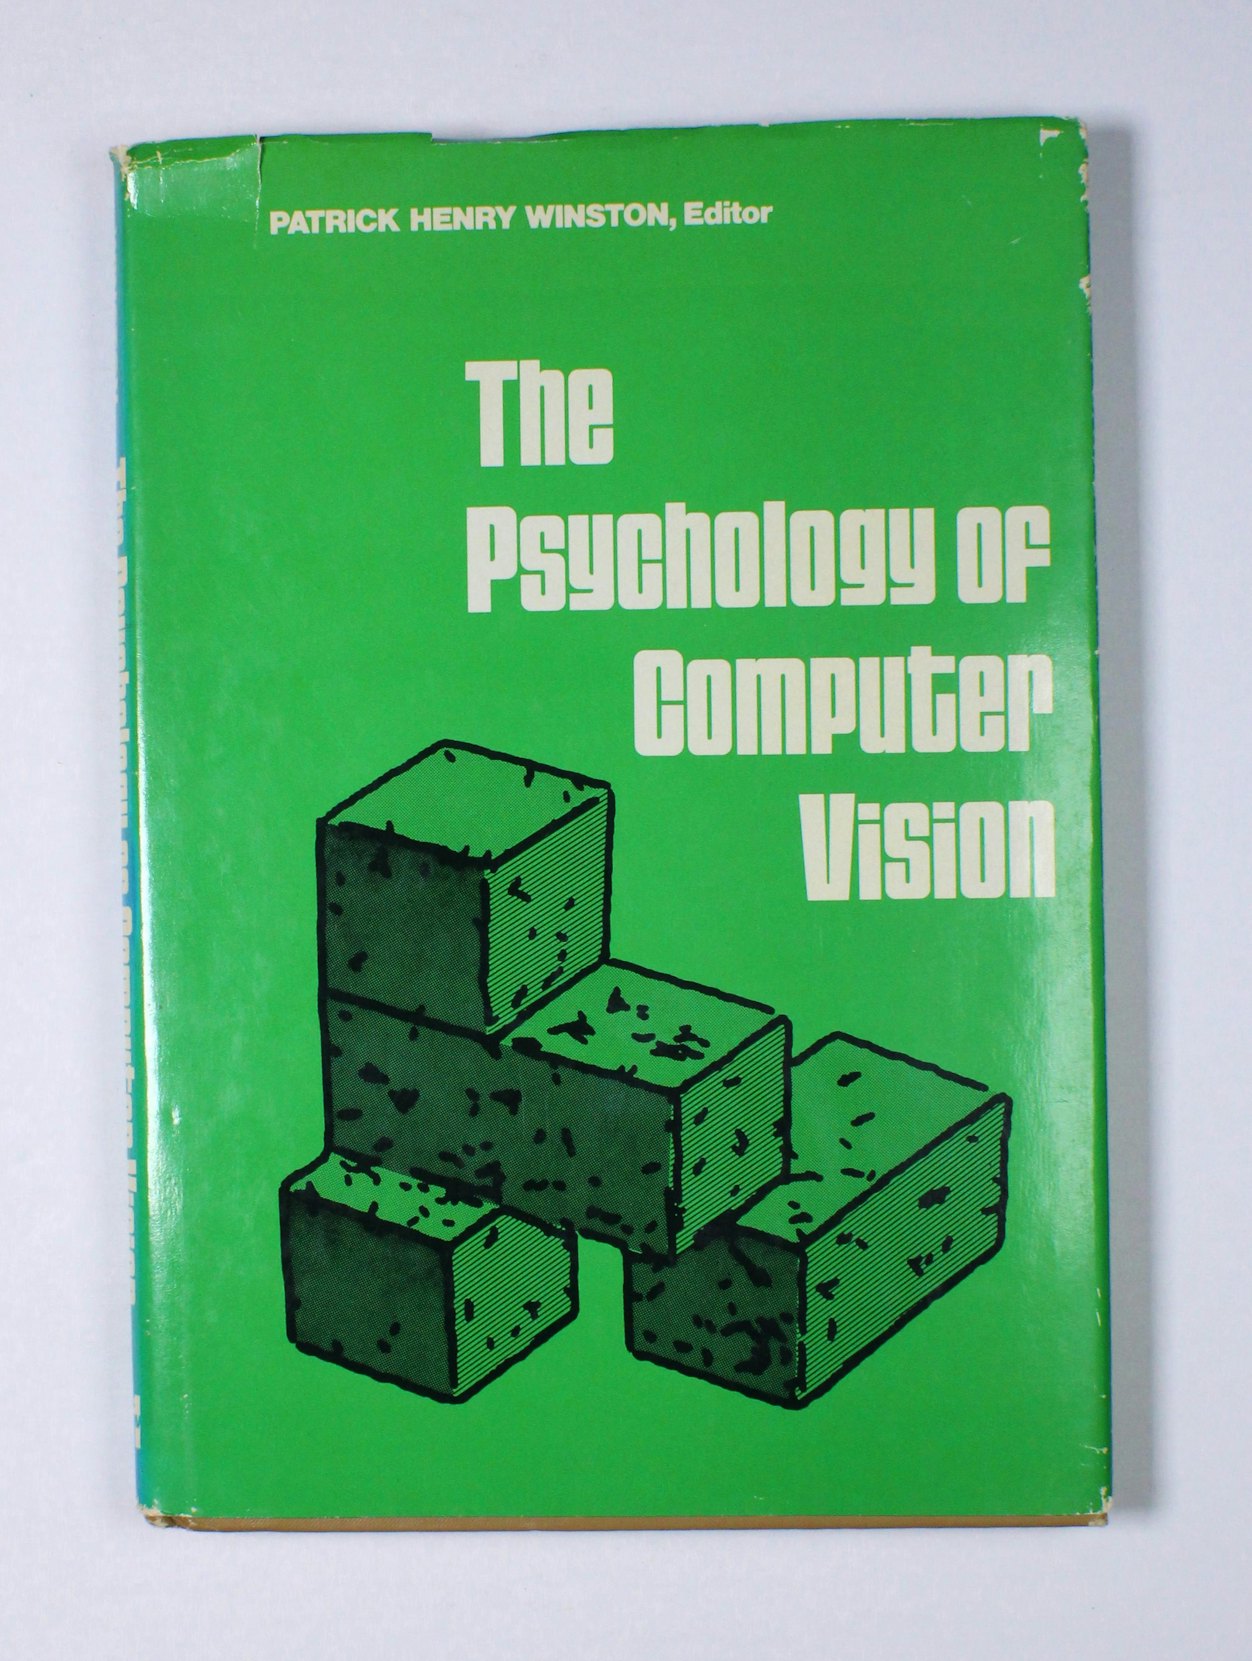 The Psychology of Computer Vision